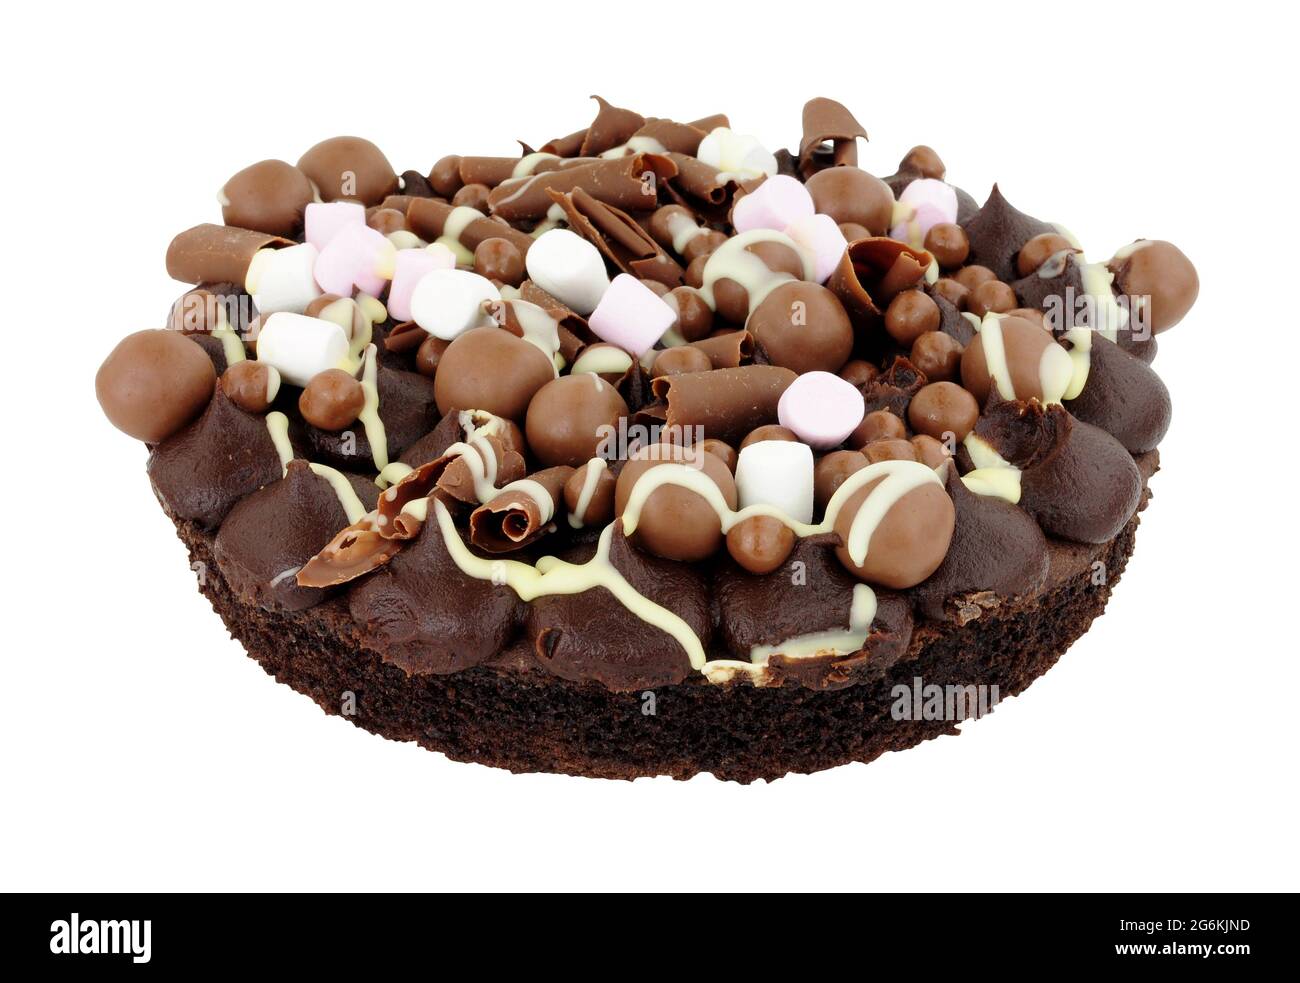 Chocolate rocky road dessert sponge cake decorated with chocolate balls and marshmallows isolated on a white background Stock Photo